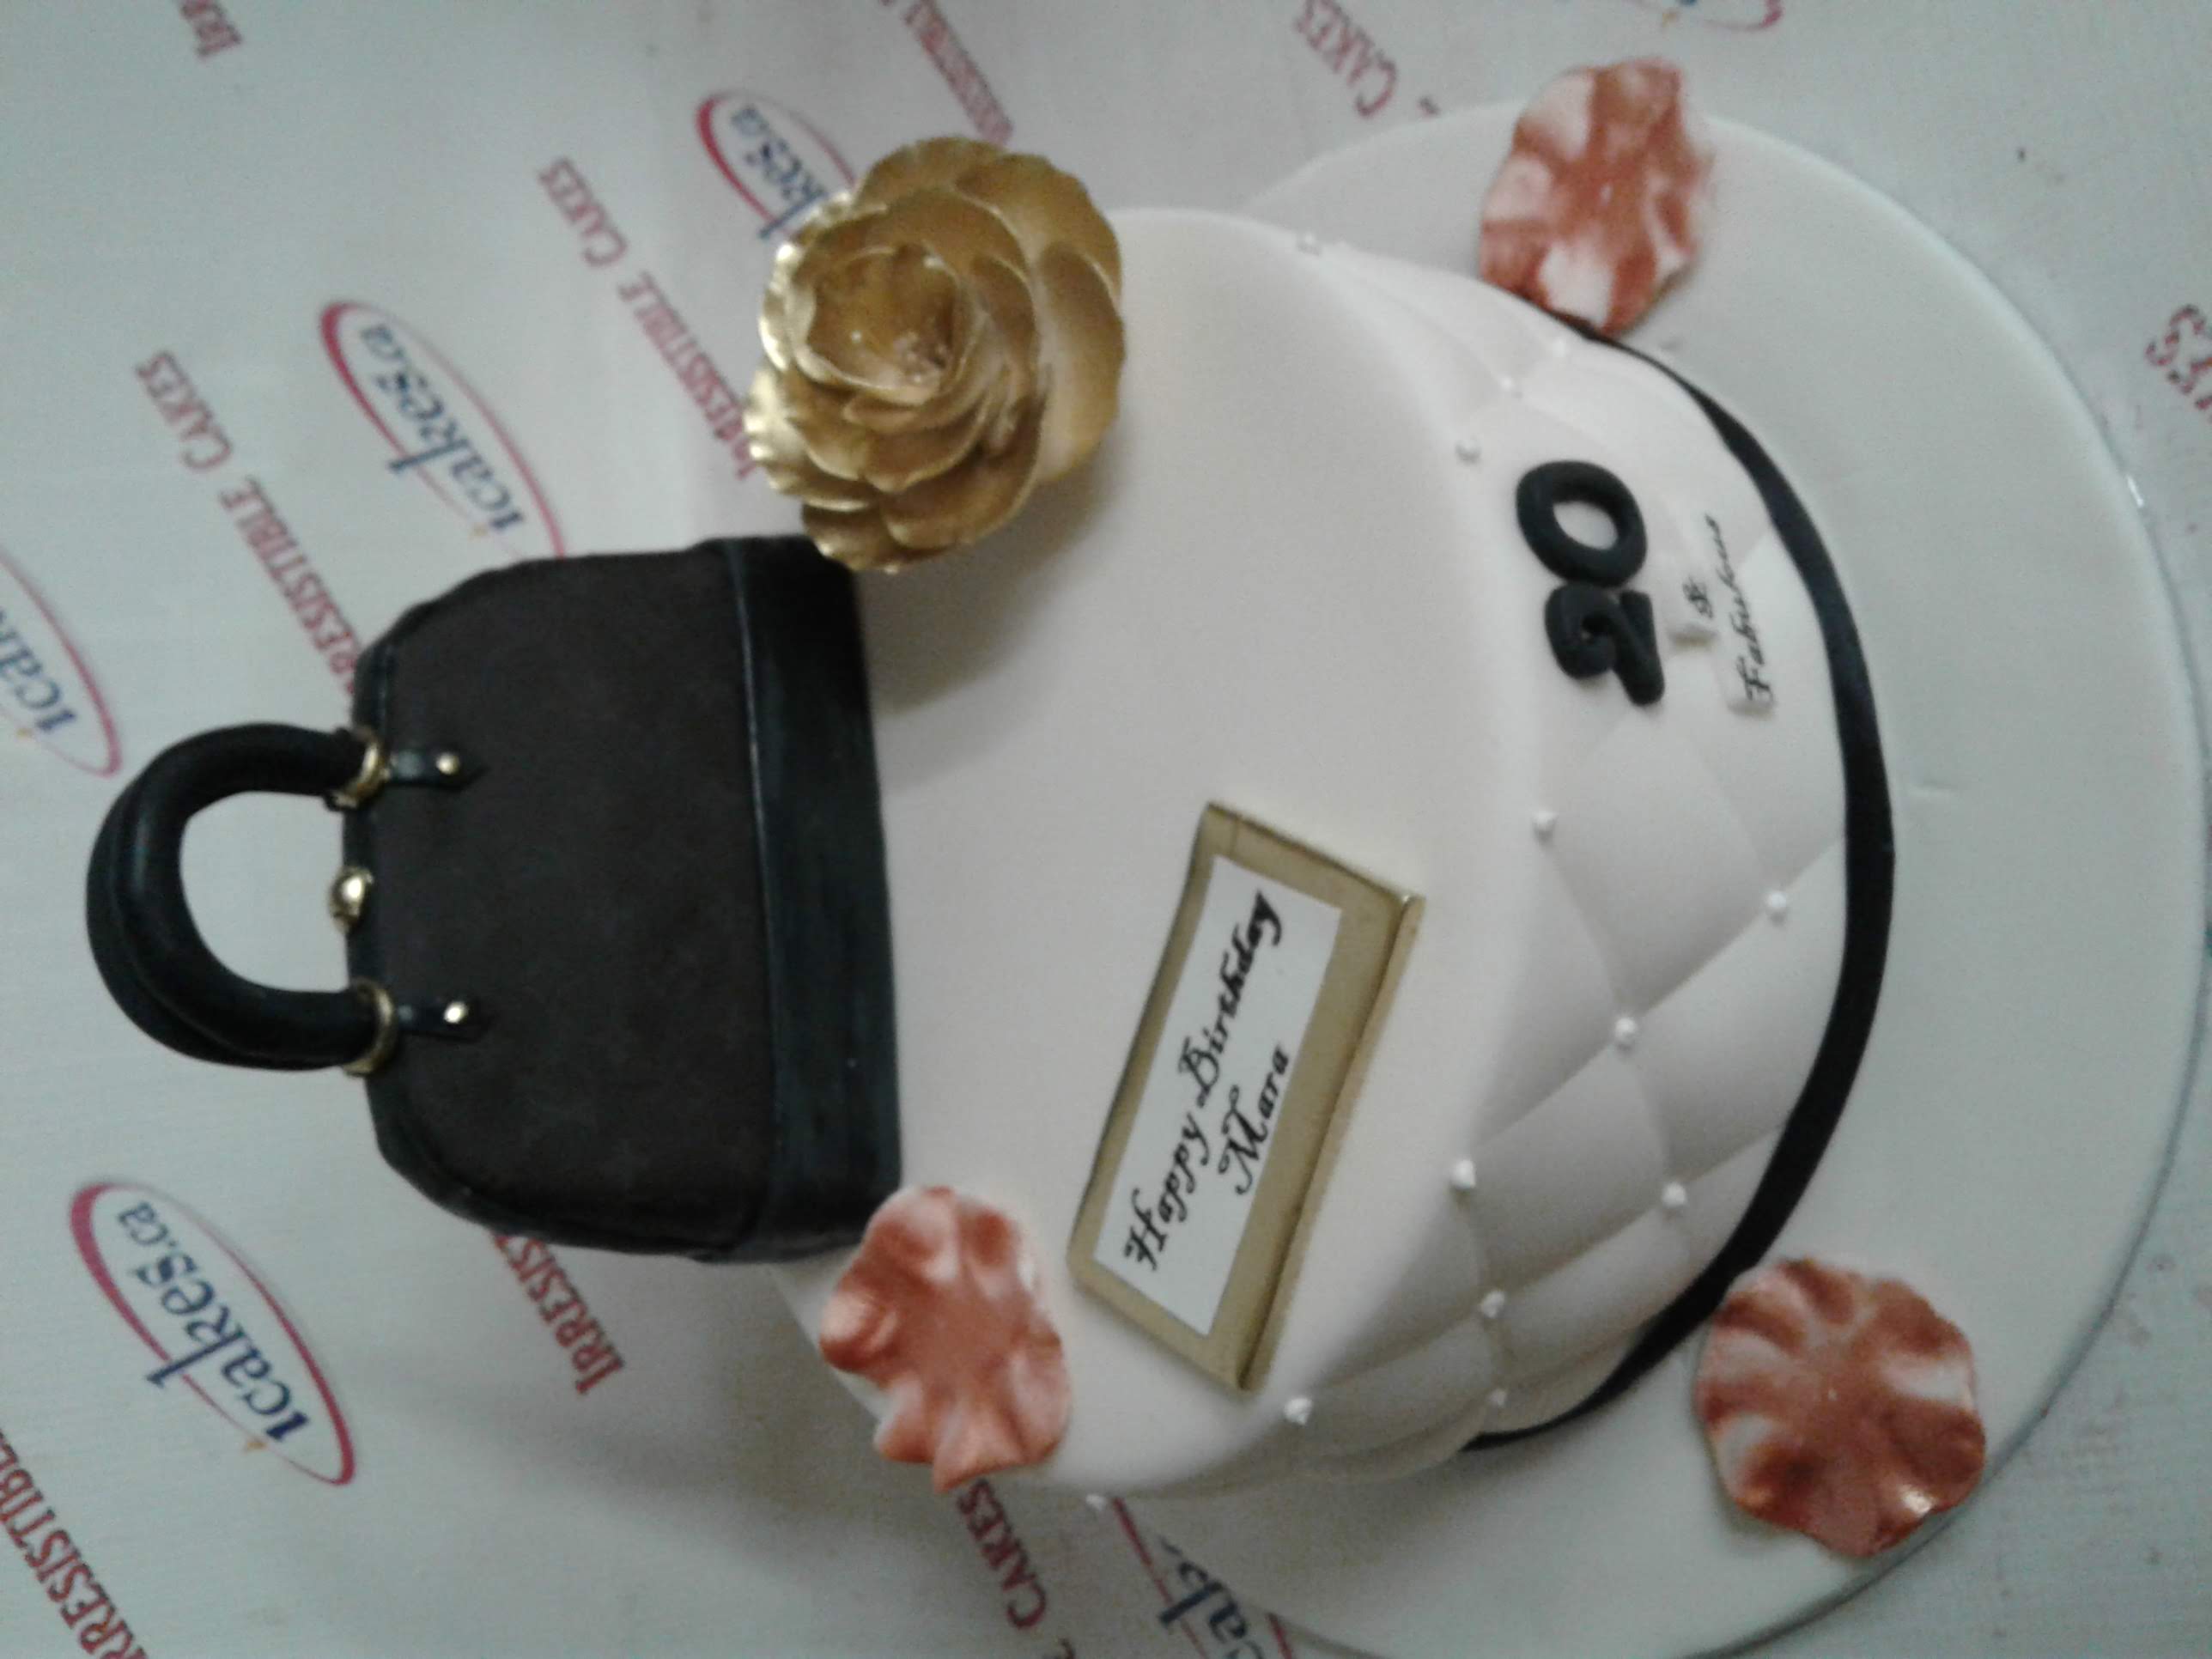 Chanel, Louis Vuitton, Gucci, Prada Bag/Purse, Black And Gold Rose, Birthday Cake For Woman/Girl